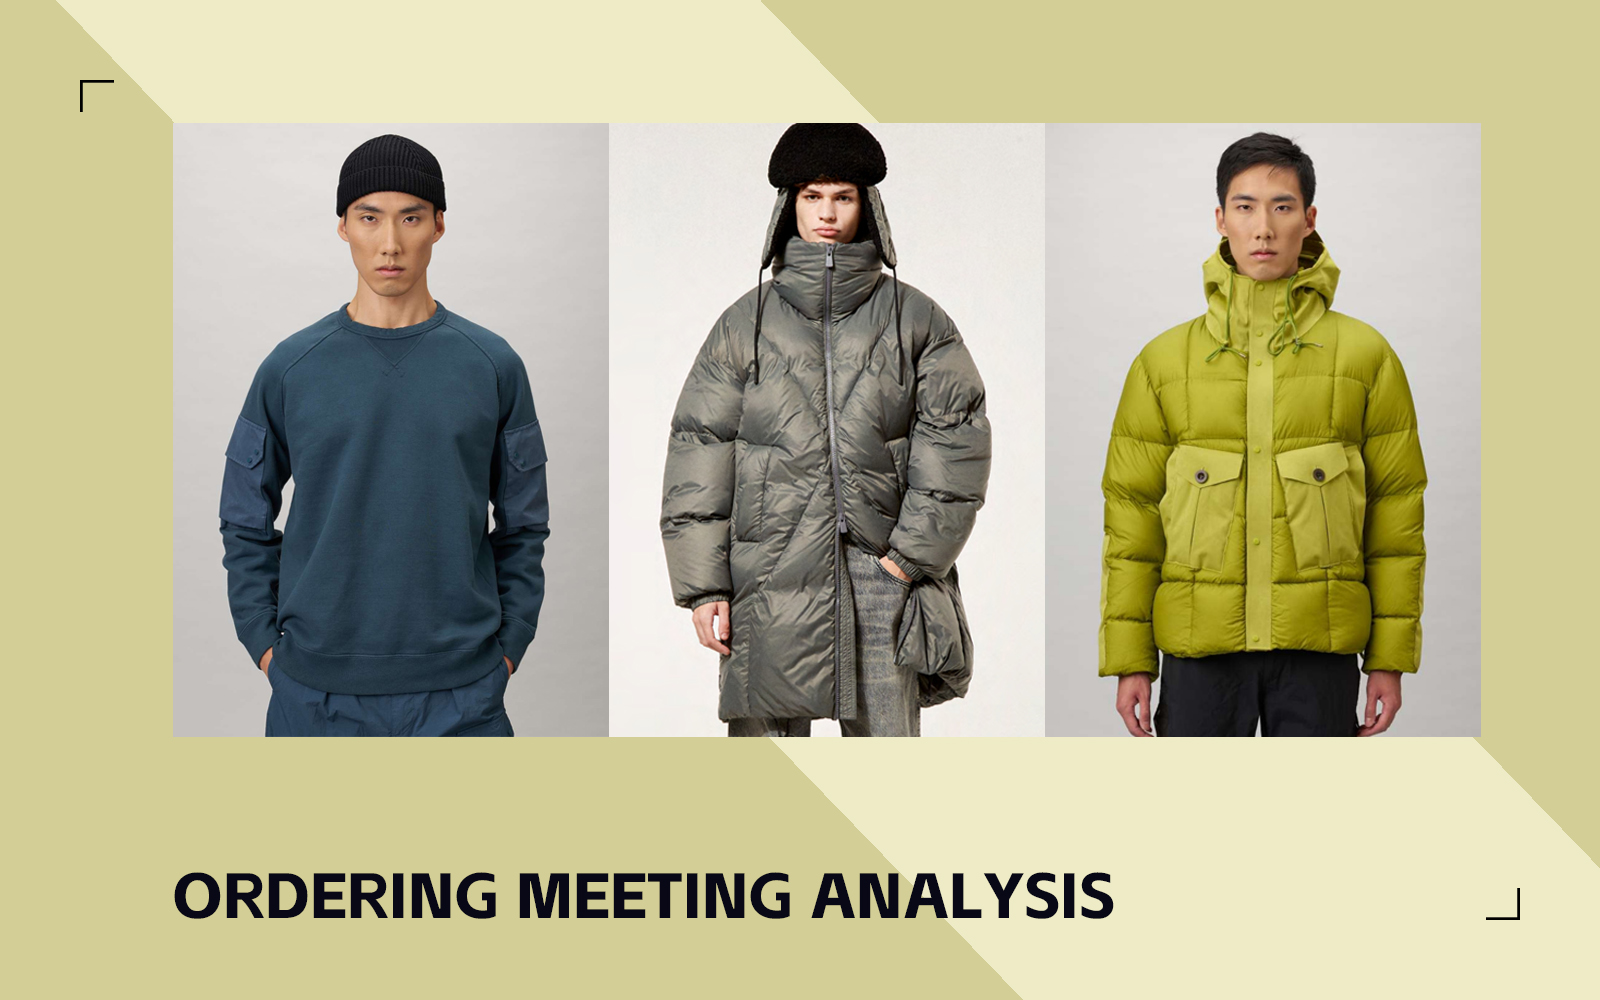 Creativity -- The Comprehensive Analysis of Men's Ordering Meeting